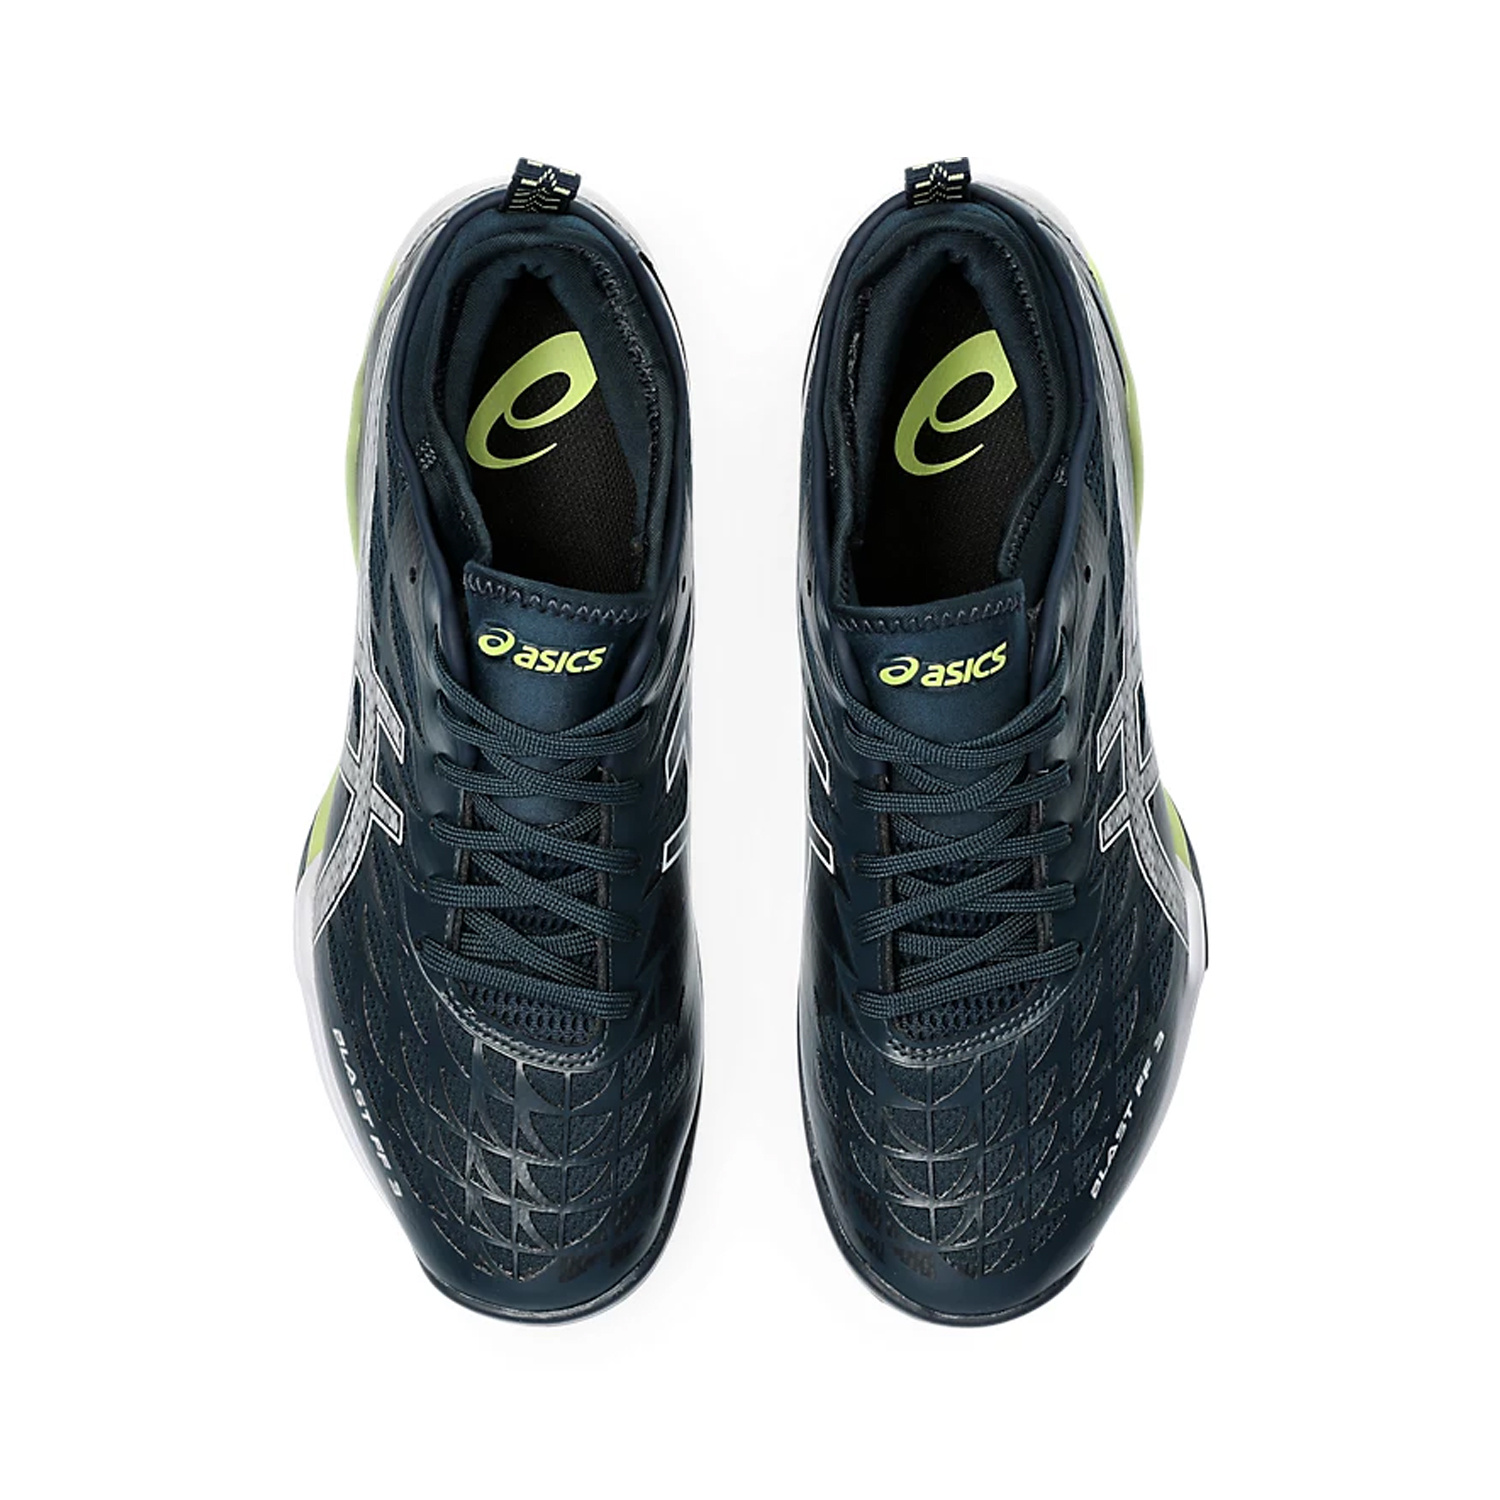 Soulier pour Homme Blast FF 3 - Volleyball Town